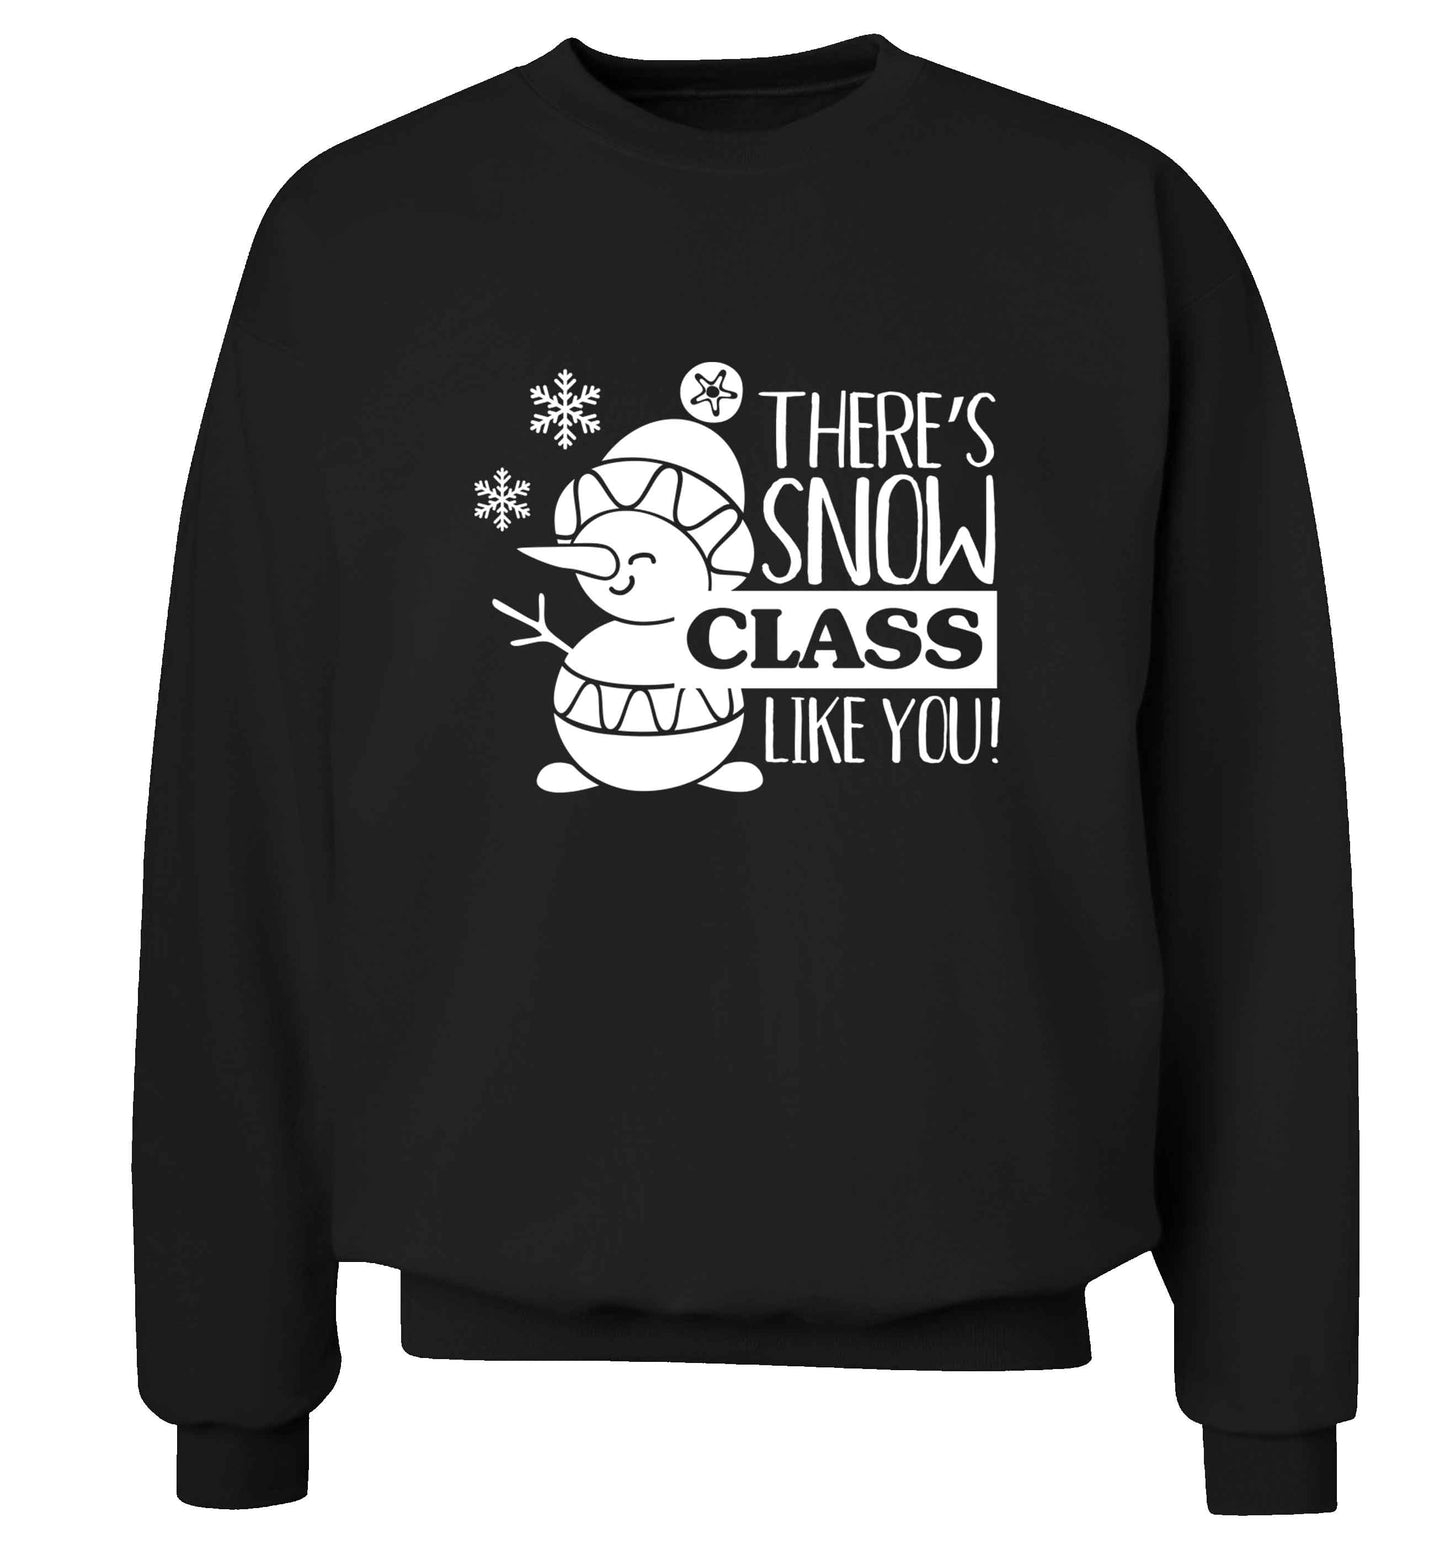 There's snow class like you adult's unisex black sweater 2XL